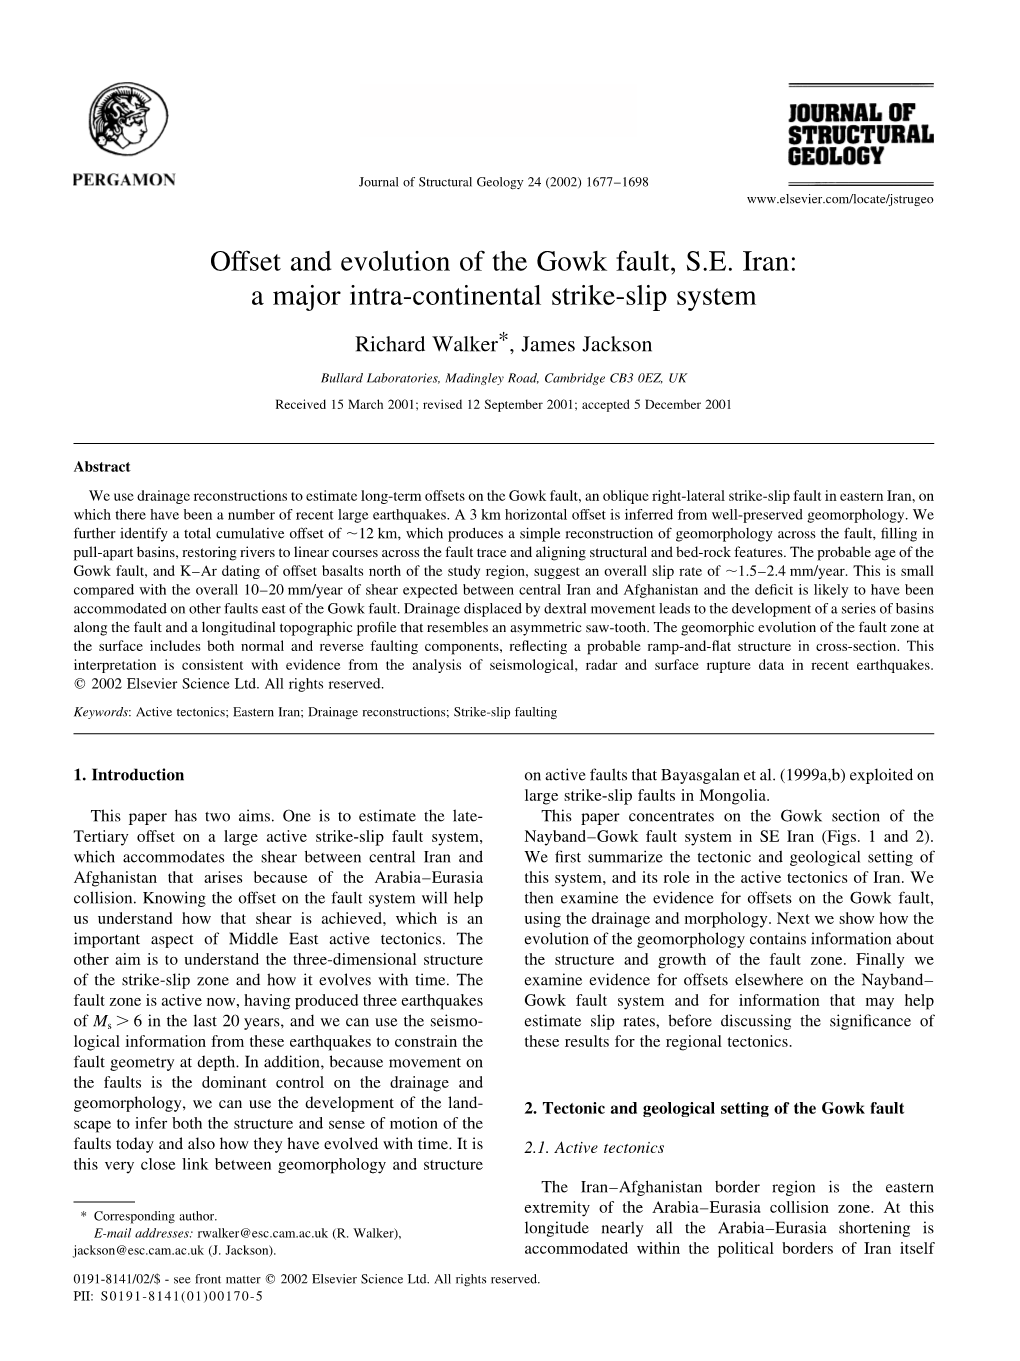 Offset and Evolution of the Gowk Fault, S.E. Iran: a Major Intra-Continental Strike-Slip System